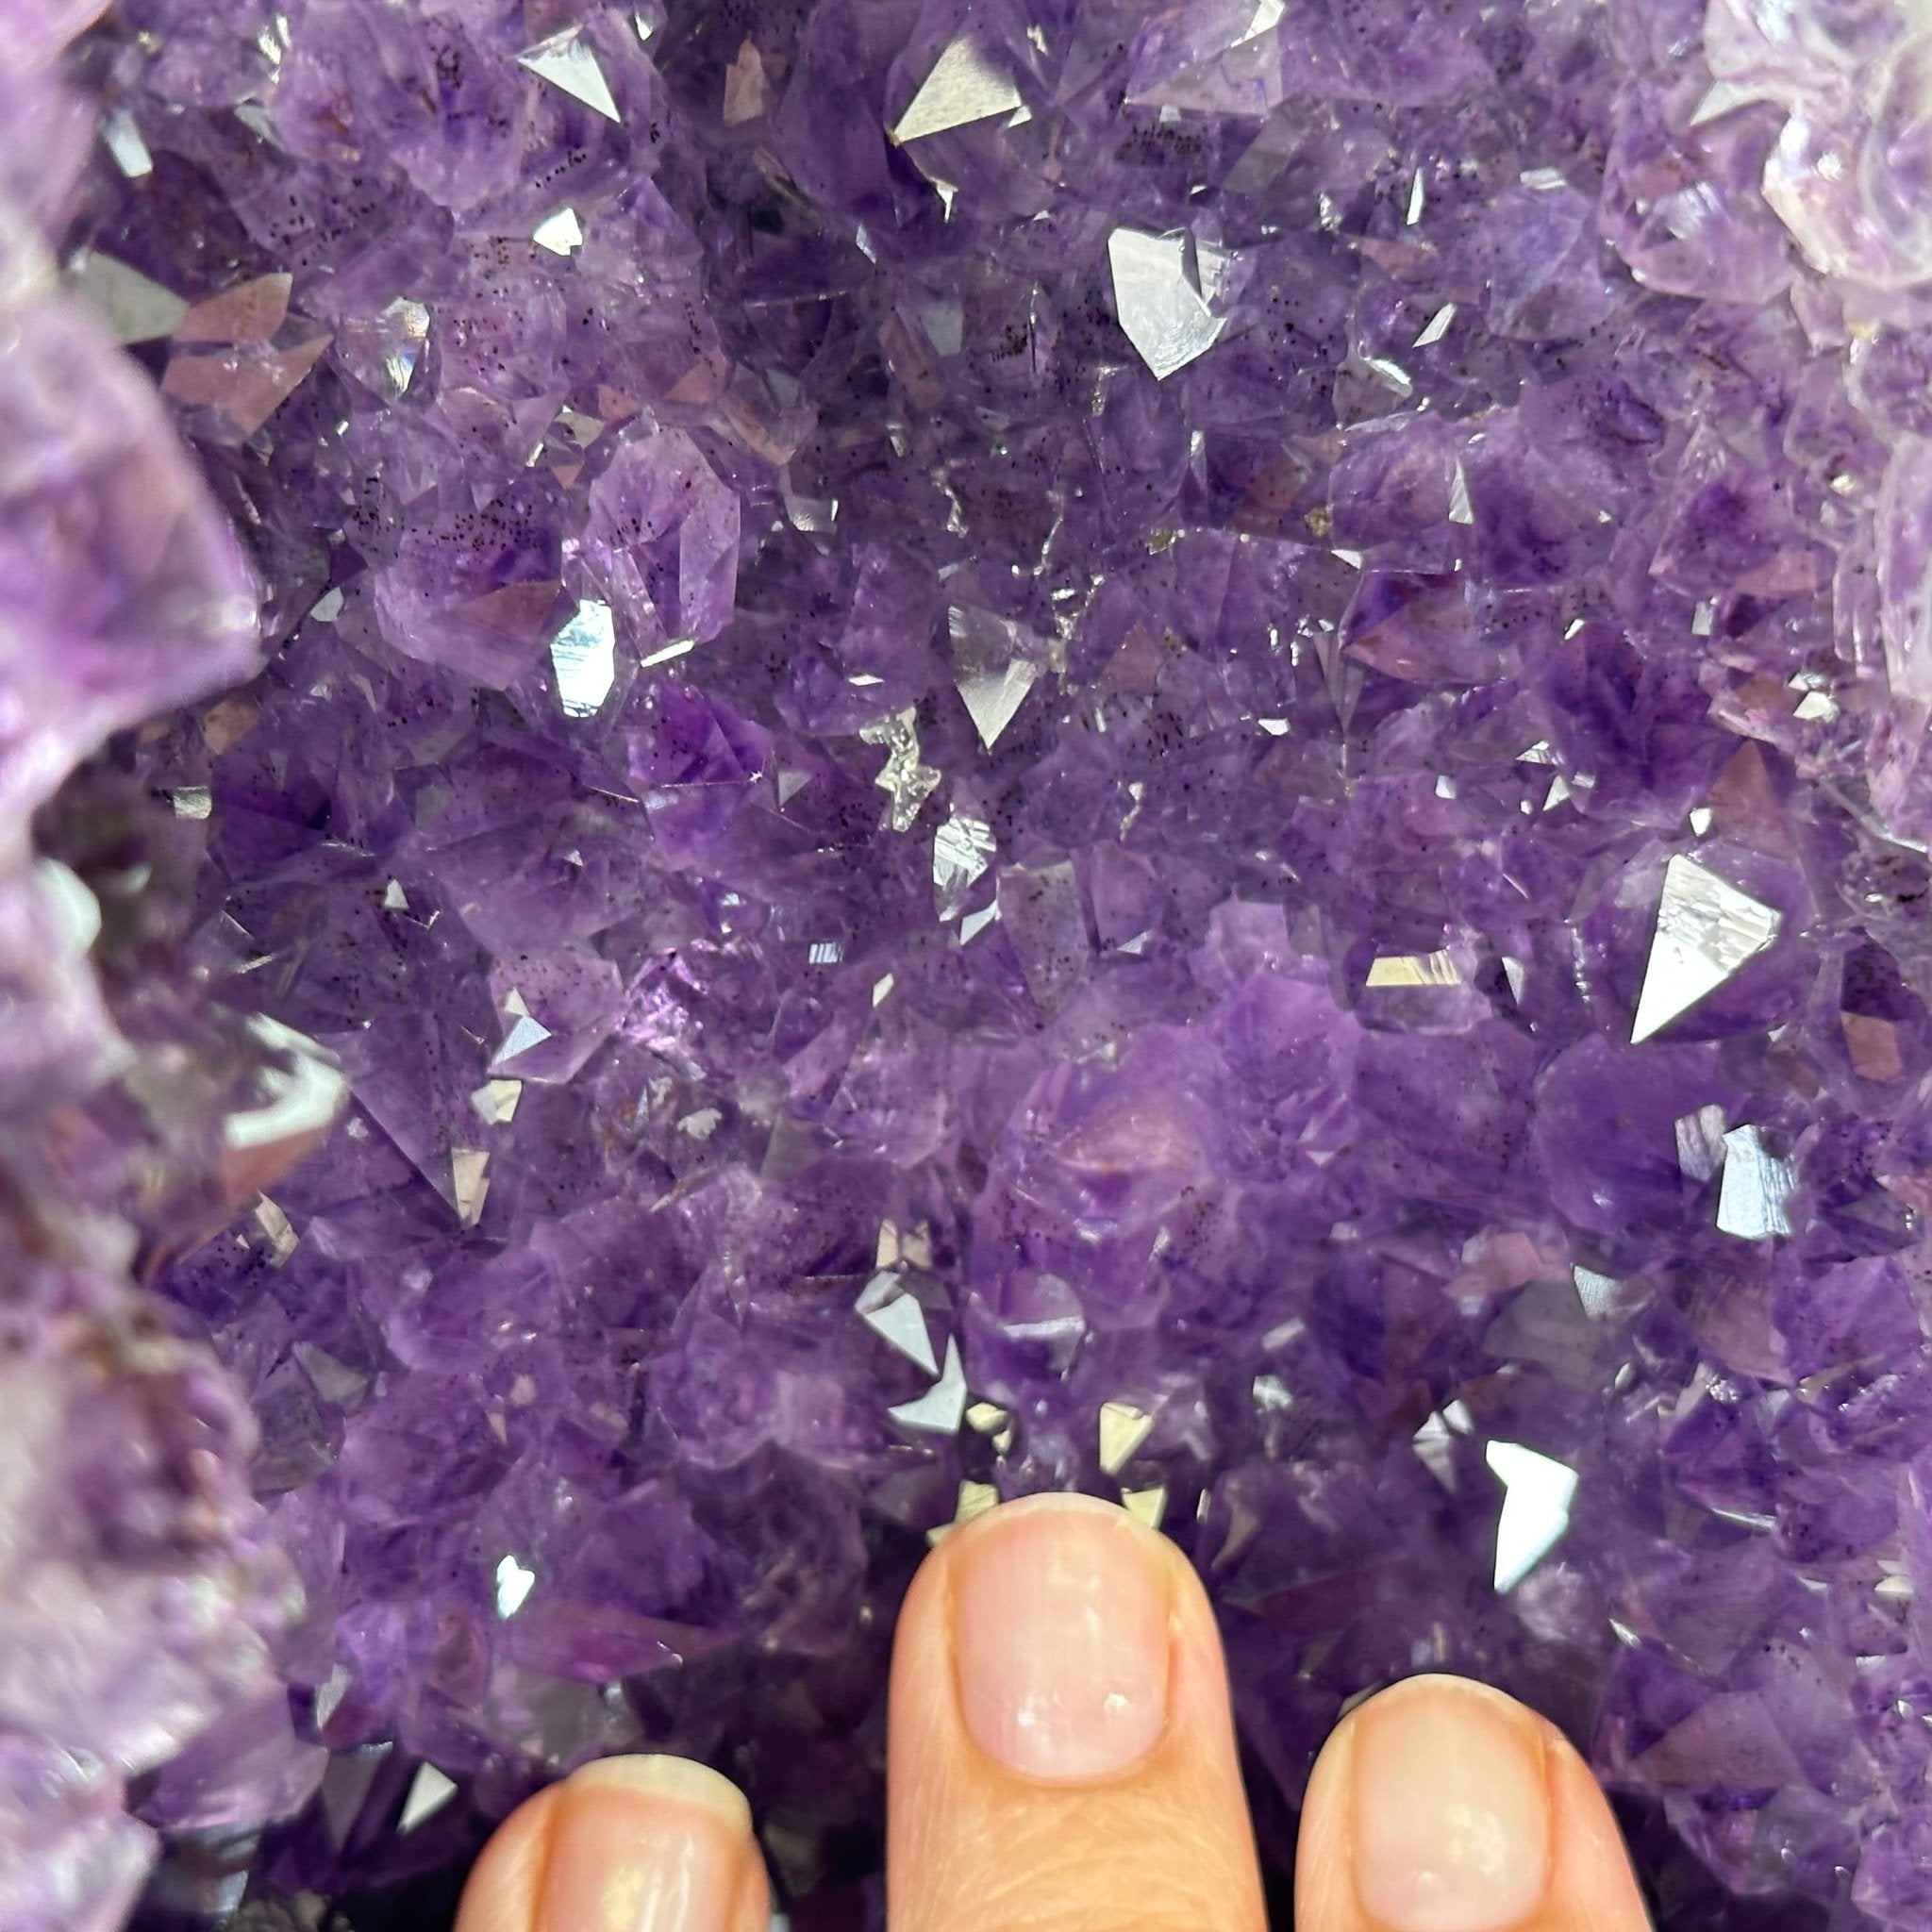 Extra Plus Quality Brazilian Amethyst Cathedral, 37 lbs & 12.9" Tall, Model #5601-0878 by Brazil Gems - Brazil GemsBrazil GemsExtra Plus Quality Brazilian Amethyst Cathedral, 37 lbs & 12.9" Tall, Model #5601-0878 by Brazil GemsCathedrals5601-0878